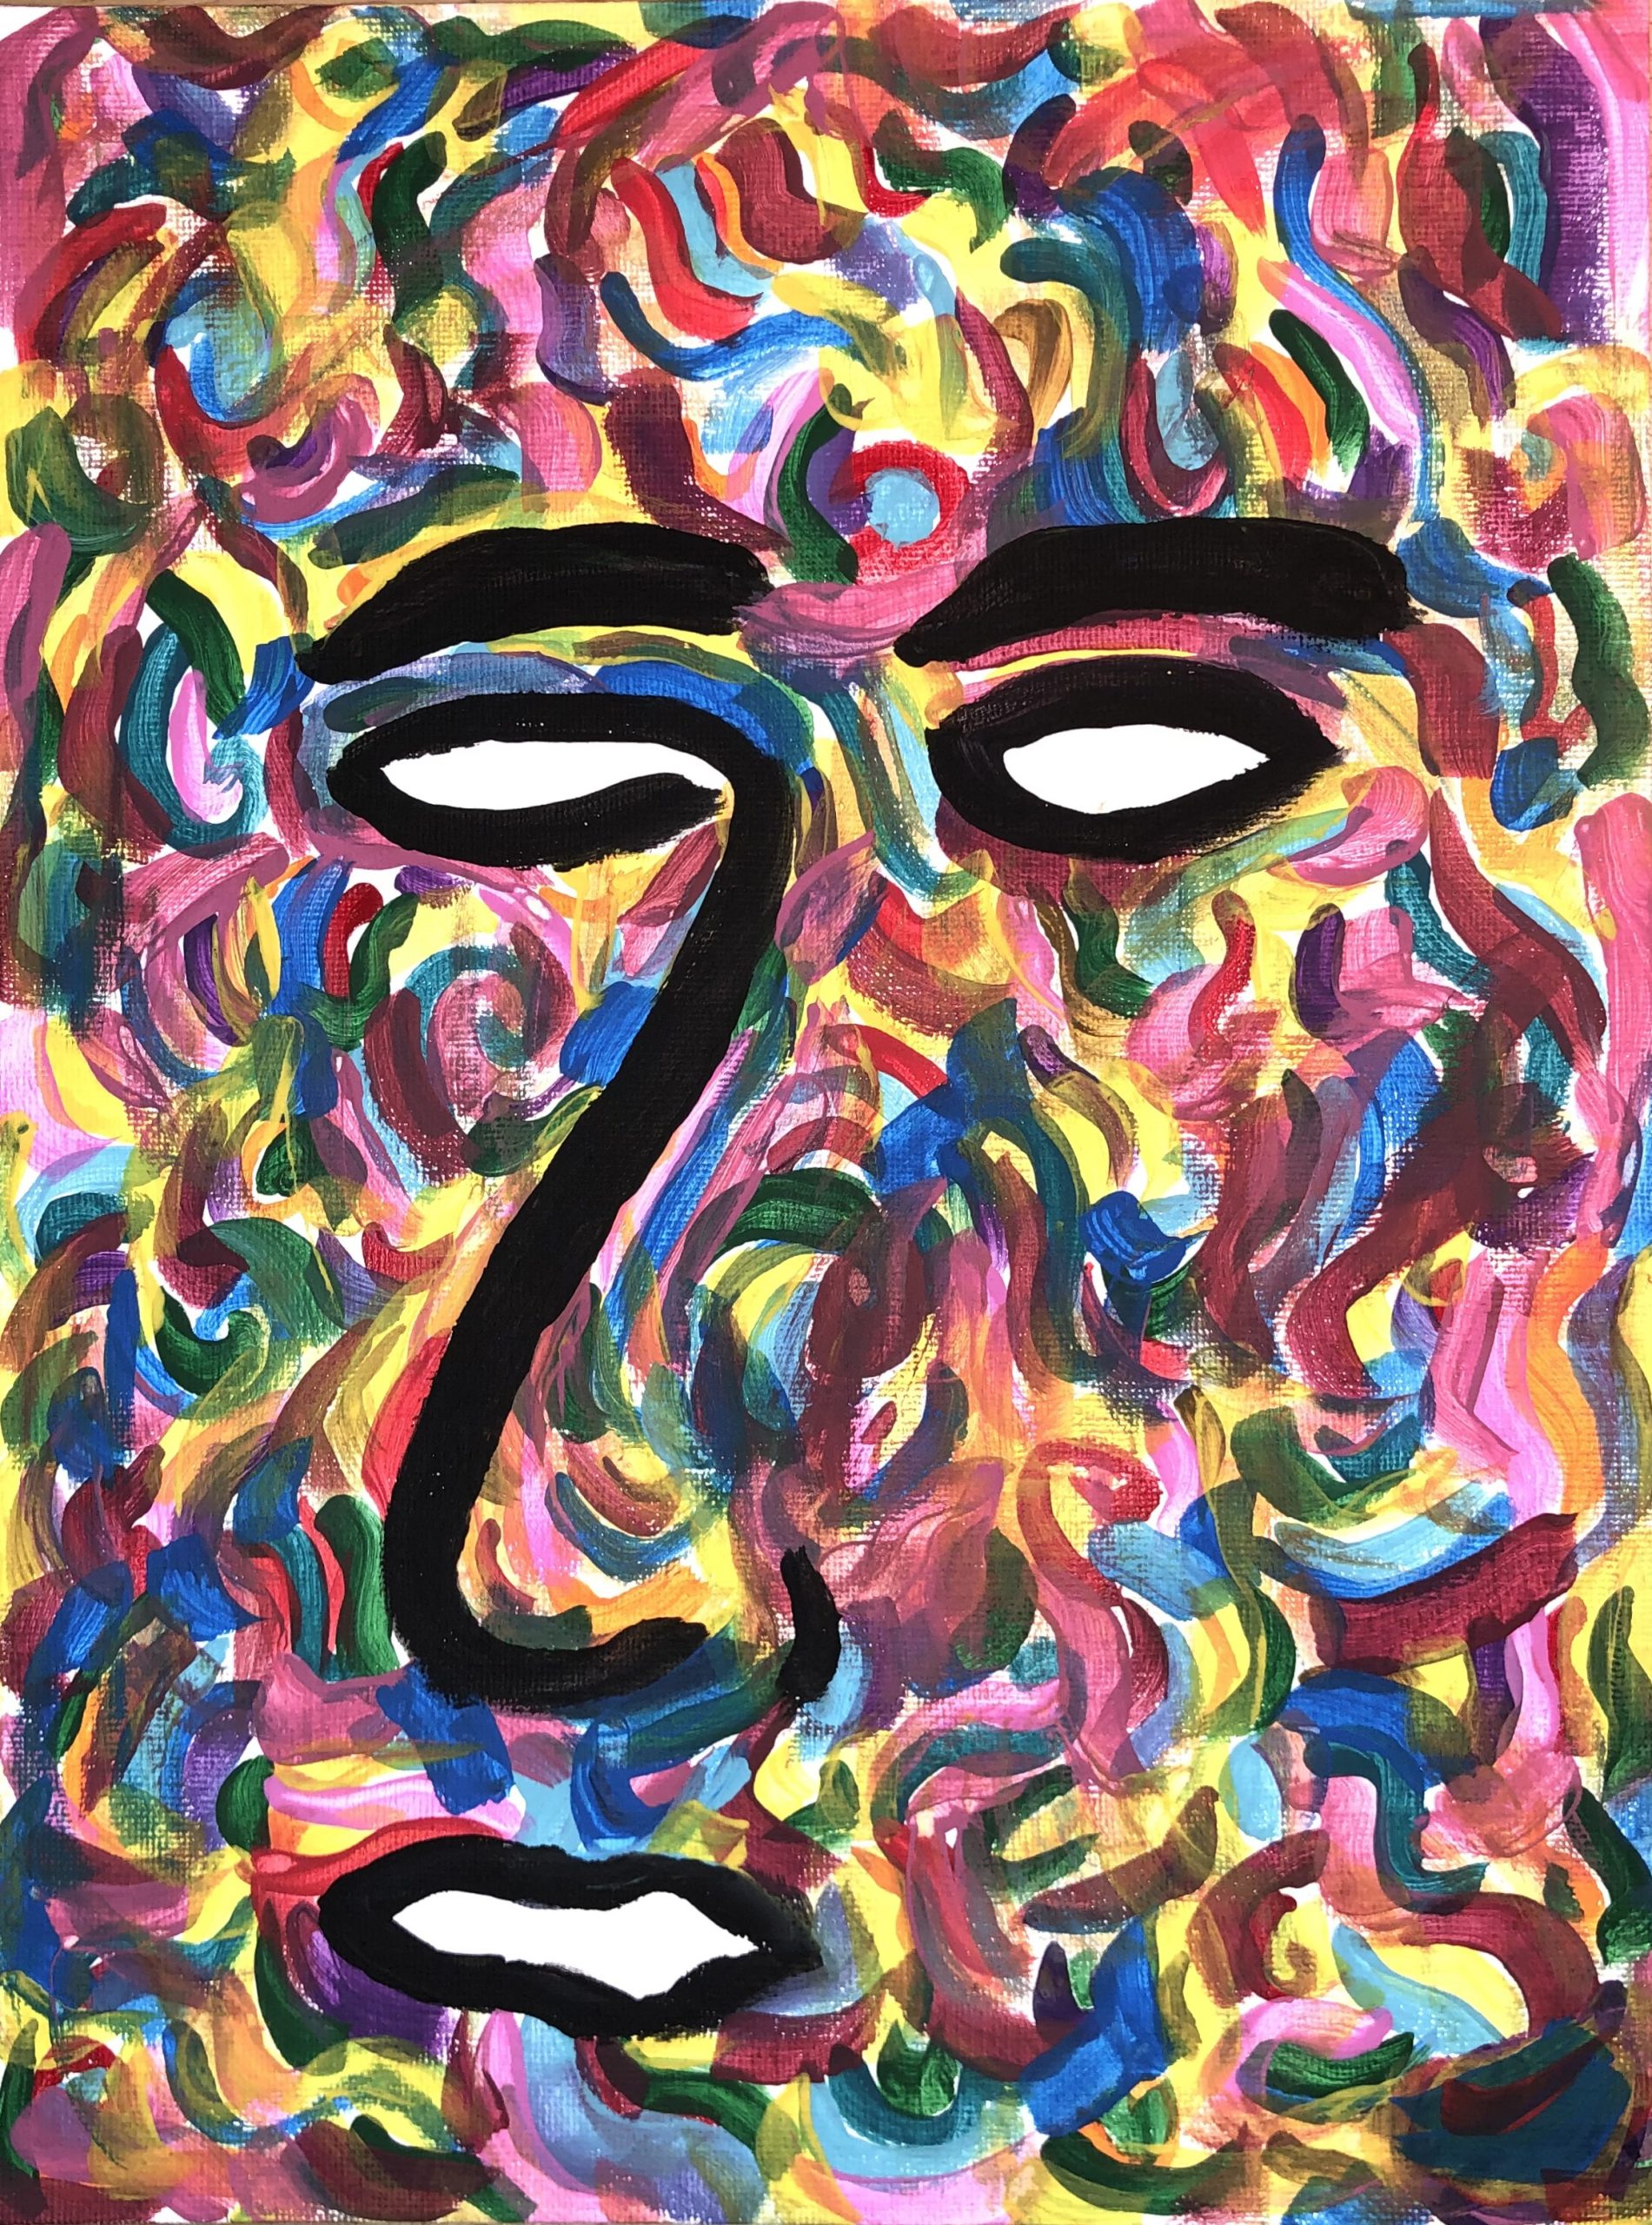 Eyes, eyebrows, a nose, and a mouth surrounded by colorful swirls filling the canvas